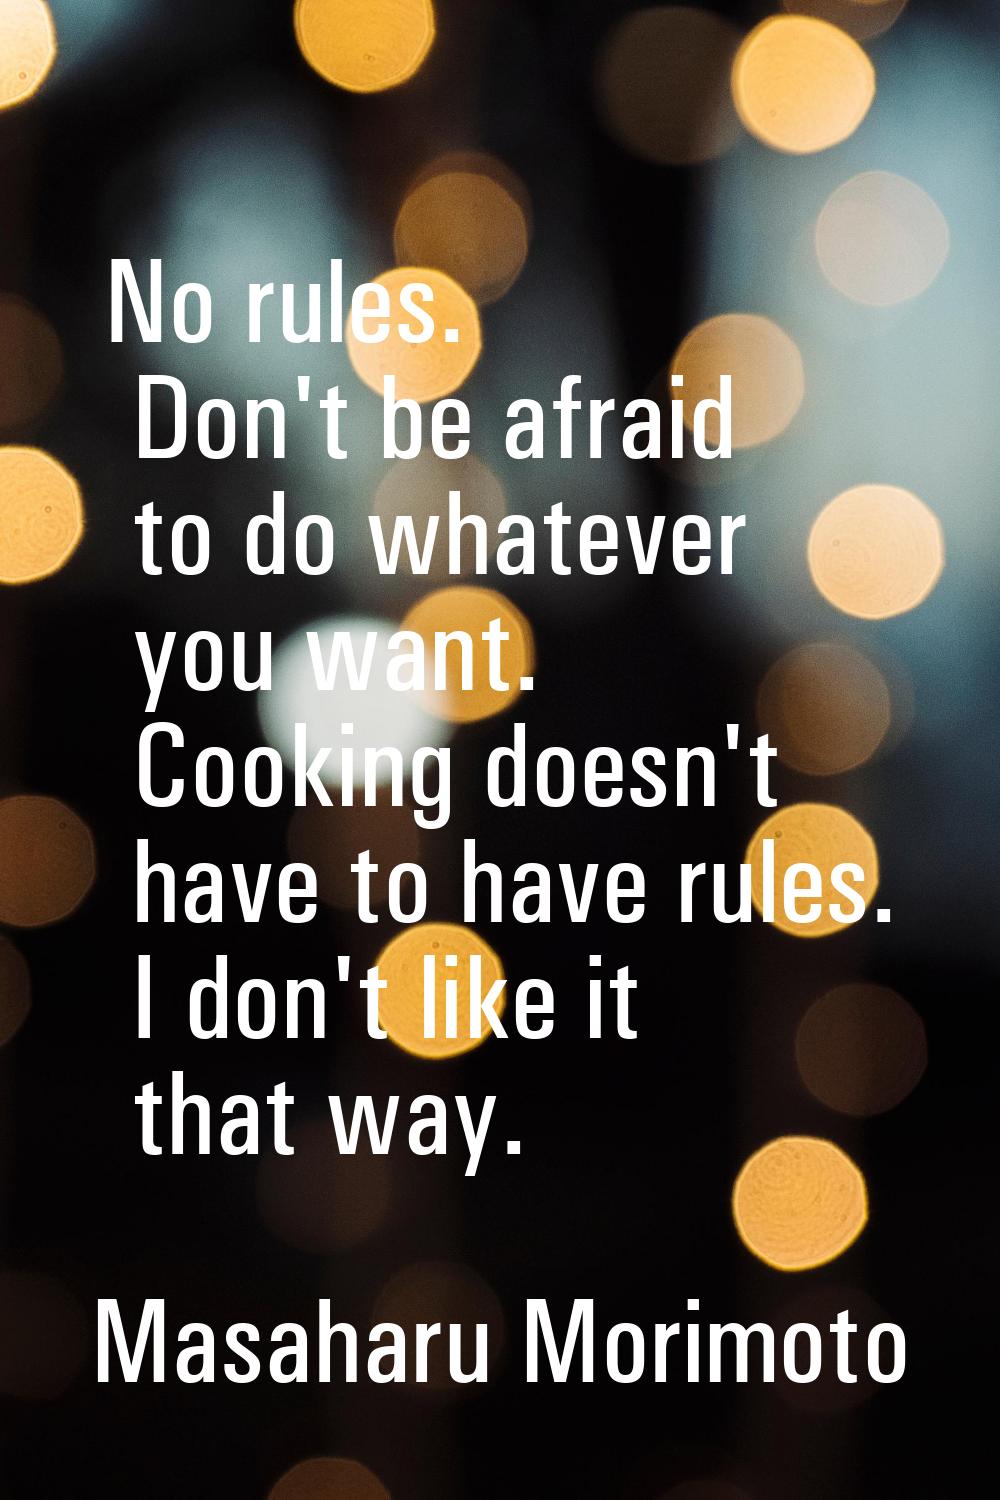 No rules. Don't be afraid to do whatever you want. Cooking doesn't have to have rules. I don't like